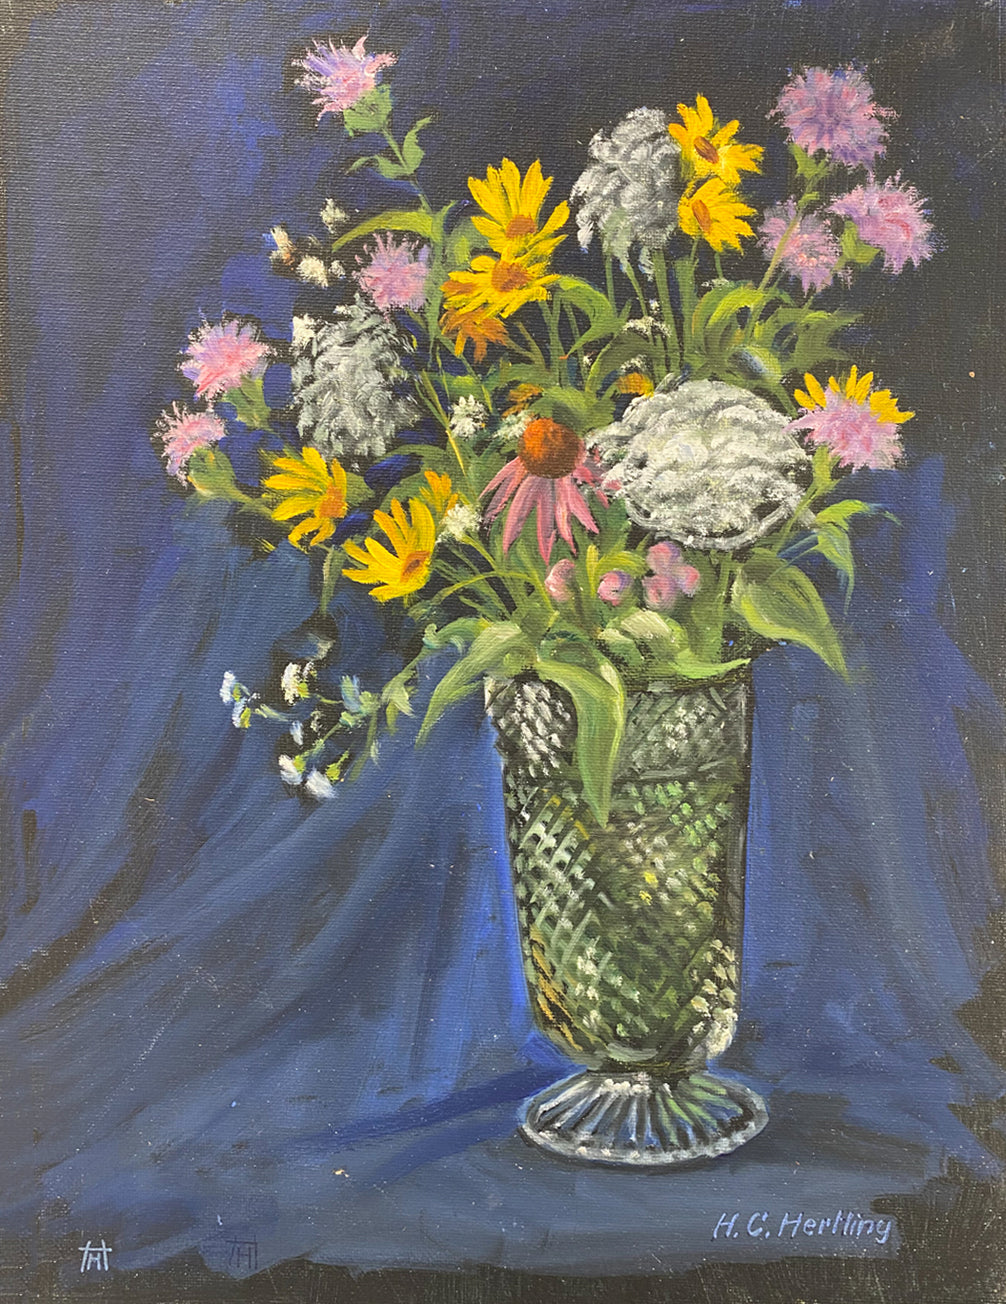 Wildflower Bouquet. Still life painting by Heiner Hertling.  Oil on board.  